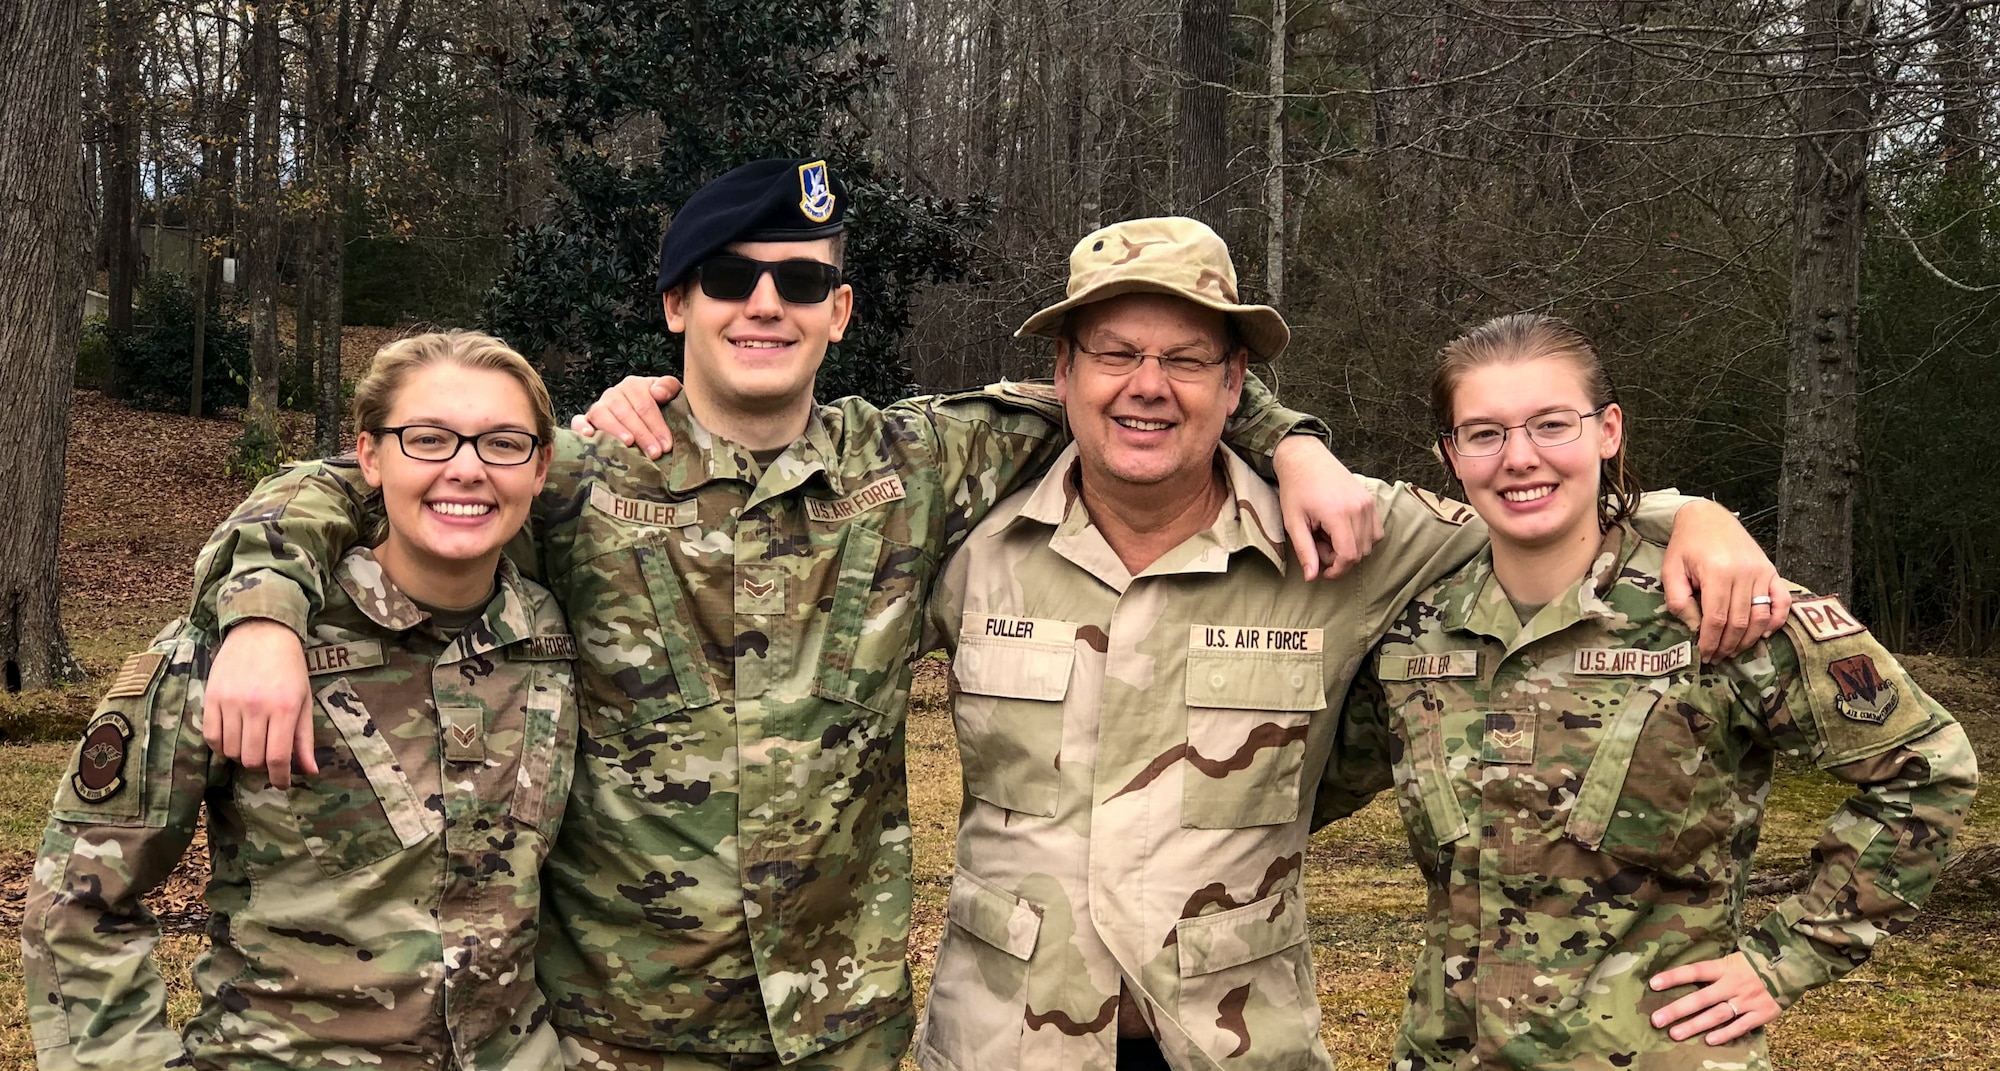 Senior Airman Selina Fuller, left, 68th Rescue Squadron rescue intelligence analyst, Airman 1st Class Sven Fuller, 4th Security Forces entry controller and Airman 1st Class Sabrina Fuller, 4th Fighter Wing public affairs specialist, pose for a photo with their father retired Air Force Master Sergeant Kent Fuller in Ashville, North Carolina, December 21, 2021.